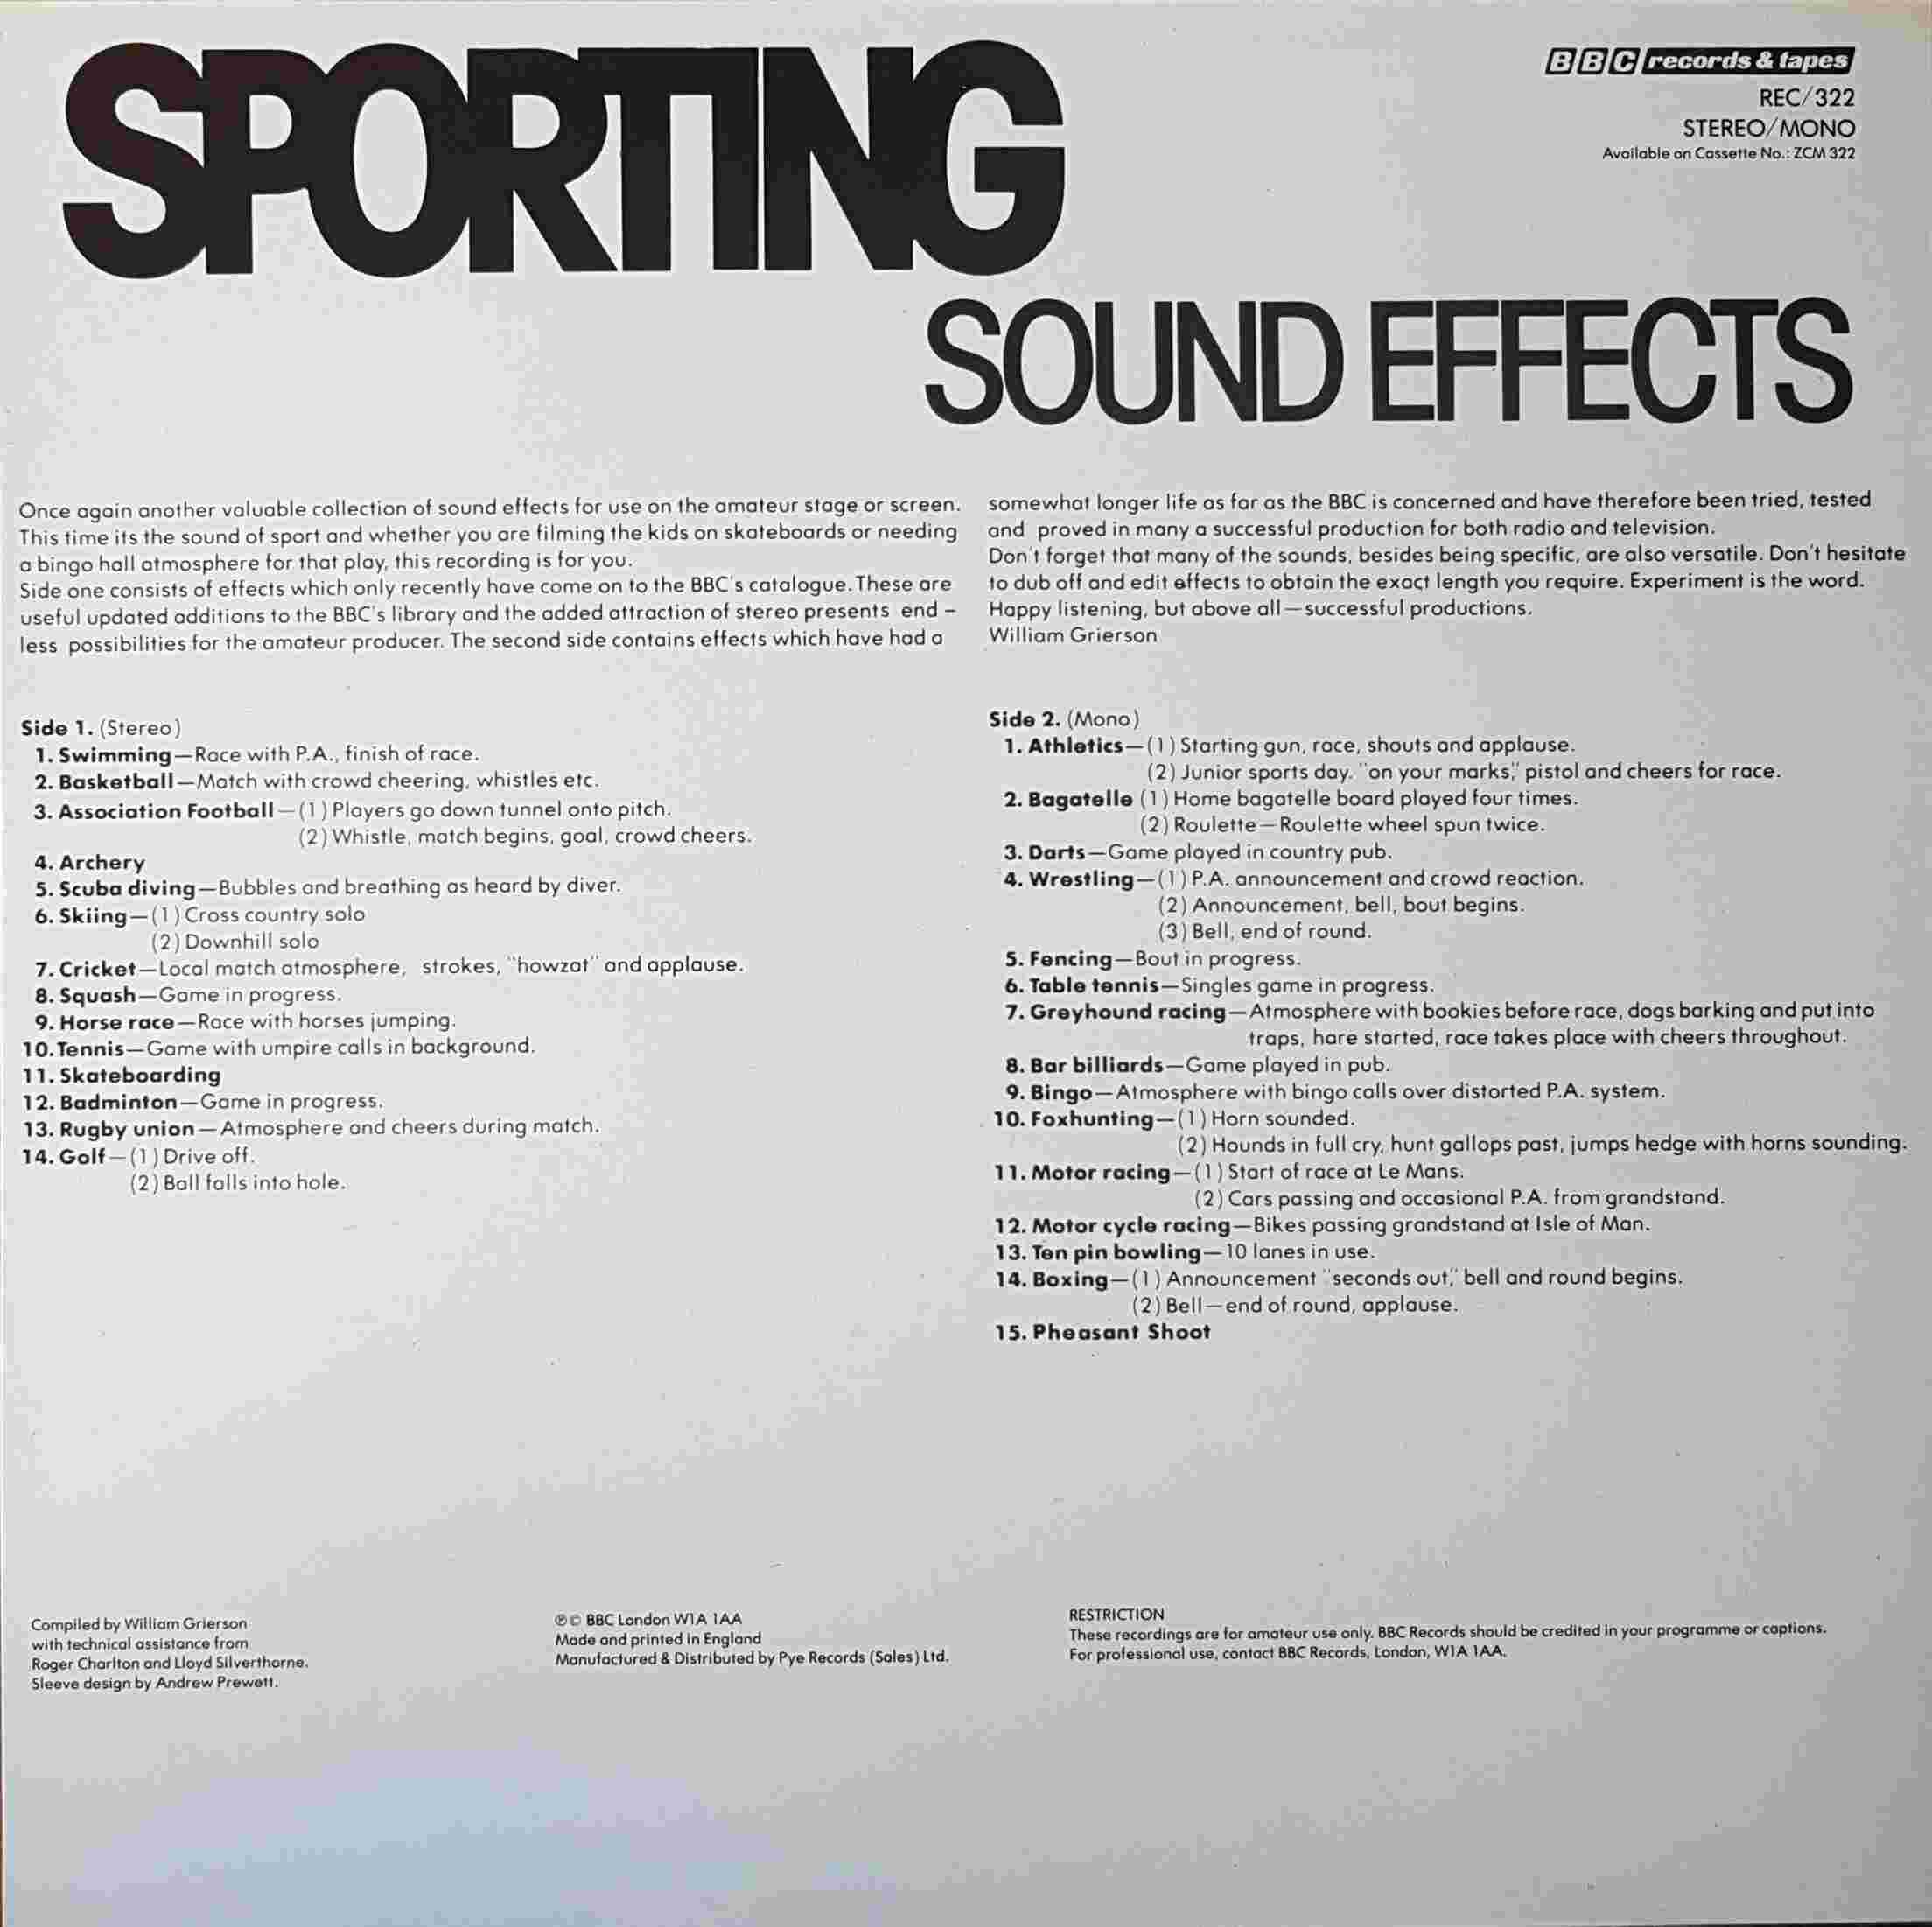 Picture of REC 322 Sporting sound effects by artist Various from the BBC records and Tapes library